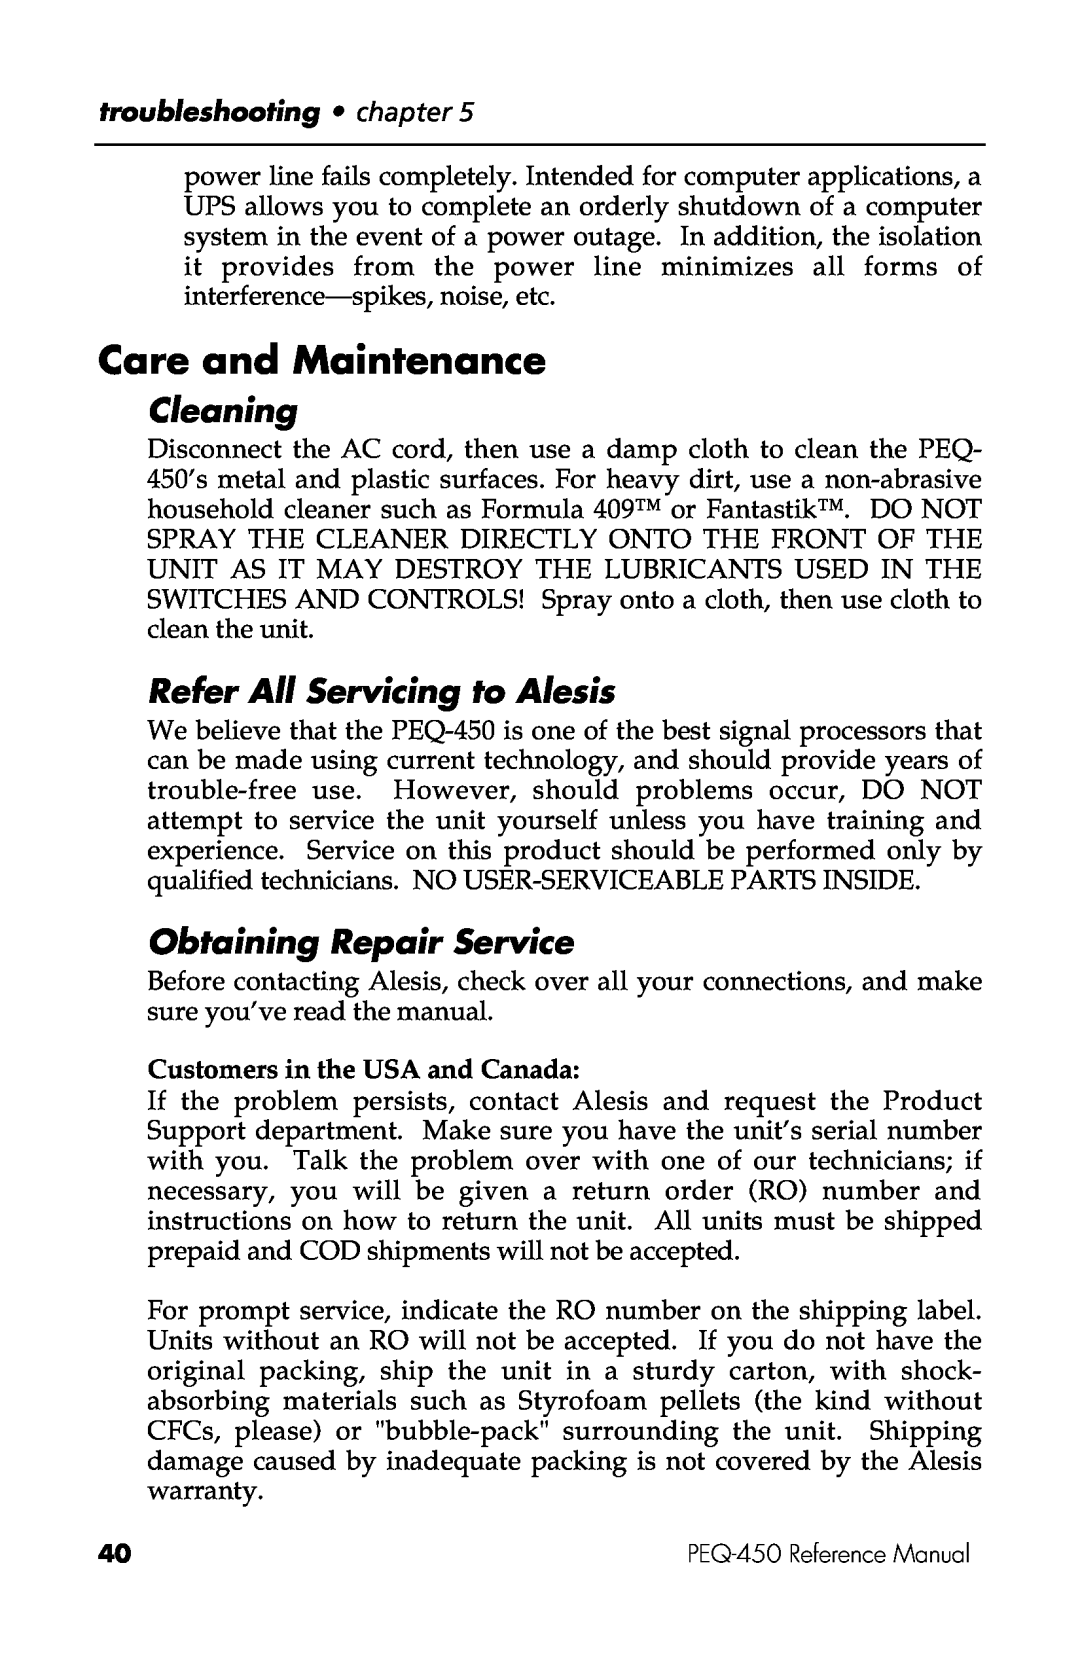 Alesis PEQ-450 manual Care and Maintenance, Cleaning, Refer All Servicing to Alesis, Obtaining Repair Service 